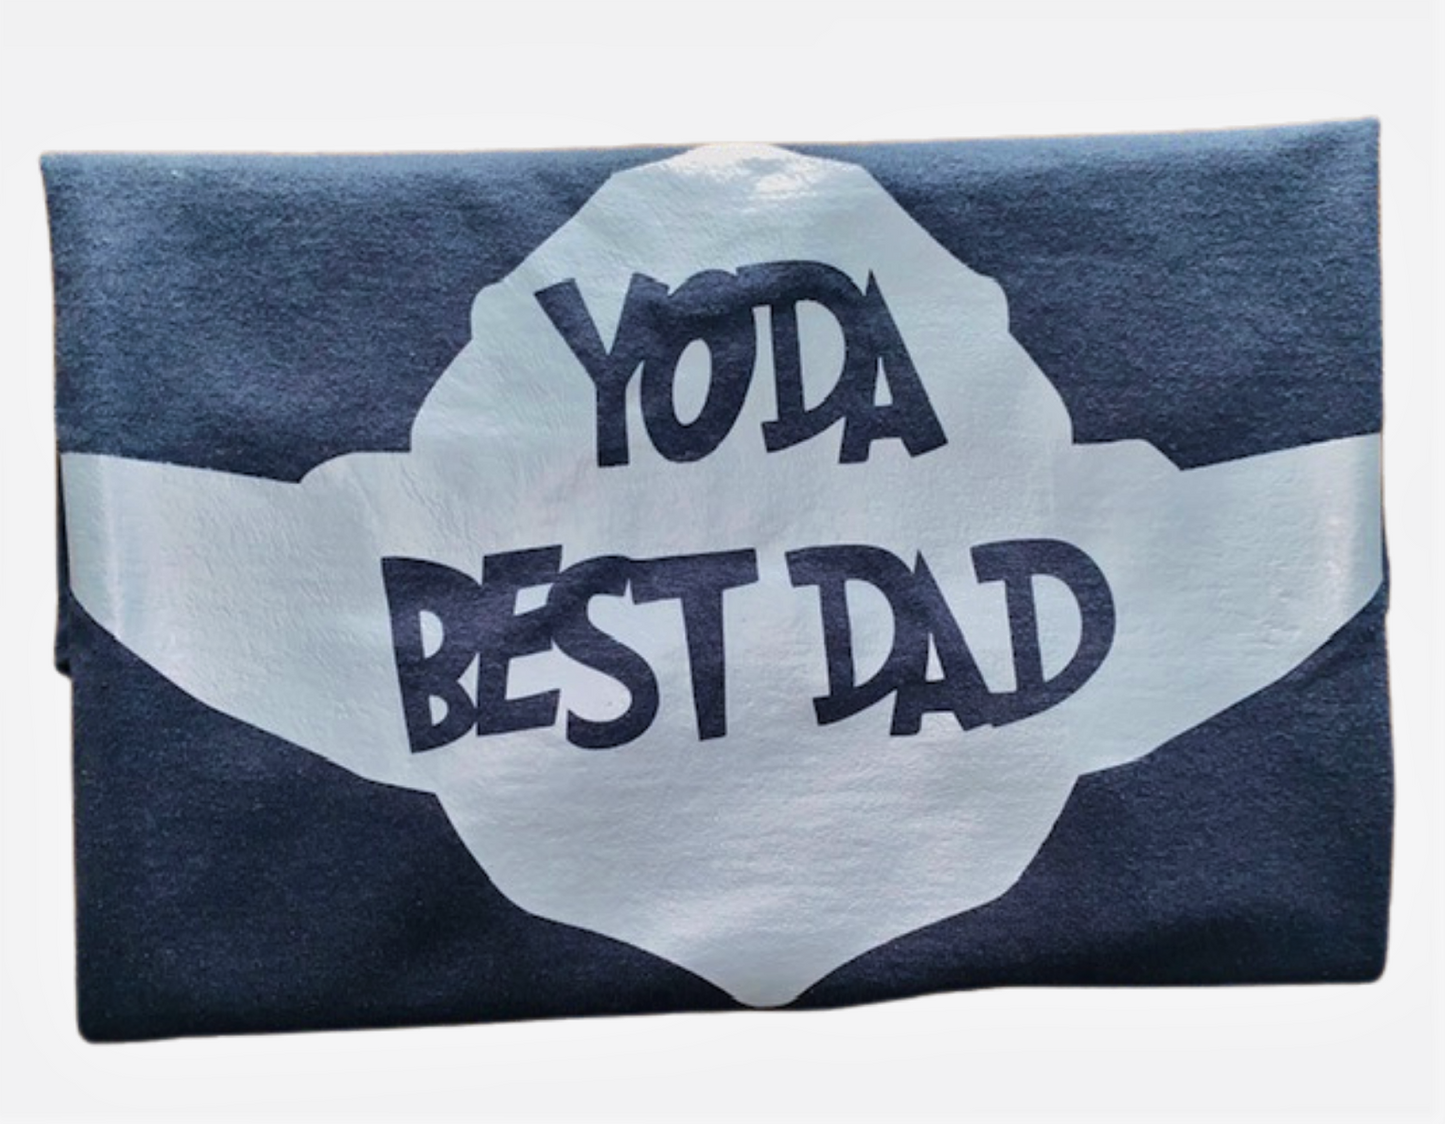 Dad Life Collection ~ Yoda Best Dad